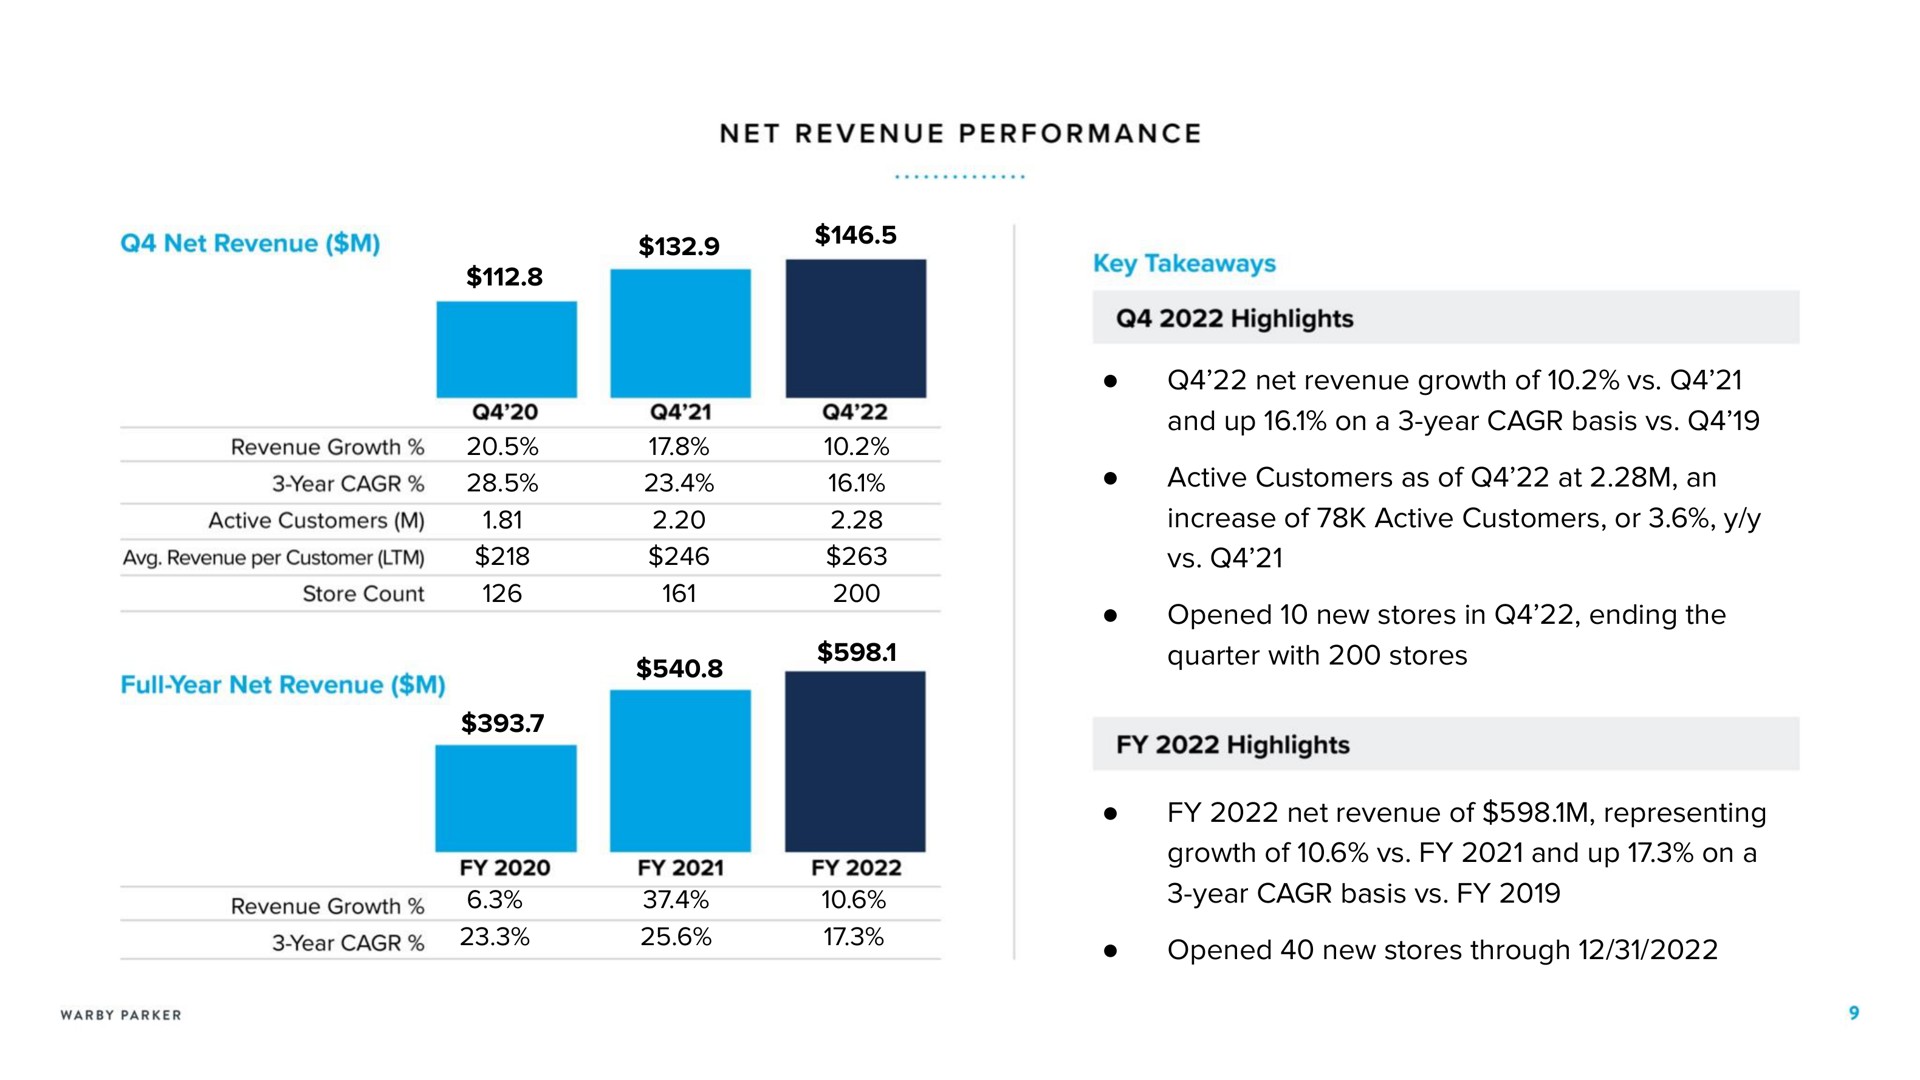 net revenue growth of and up on a year basis active customers as of at an increase of active customers or opened new stores in ending the quarter with stores net revenue of representing growth of and up on a year basis opened new stores through performance per customer store count full year highlights highlights ona | Warby Parker